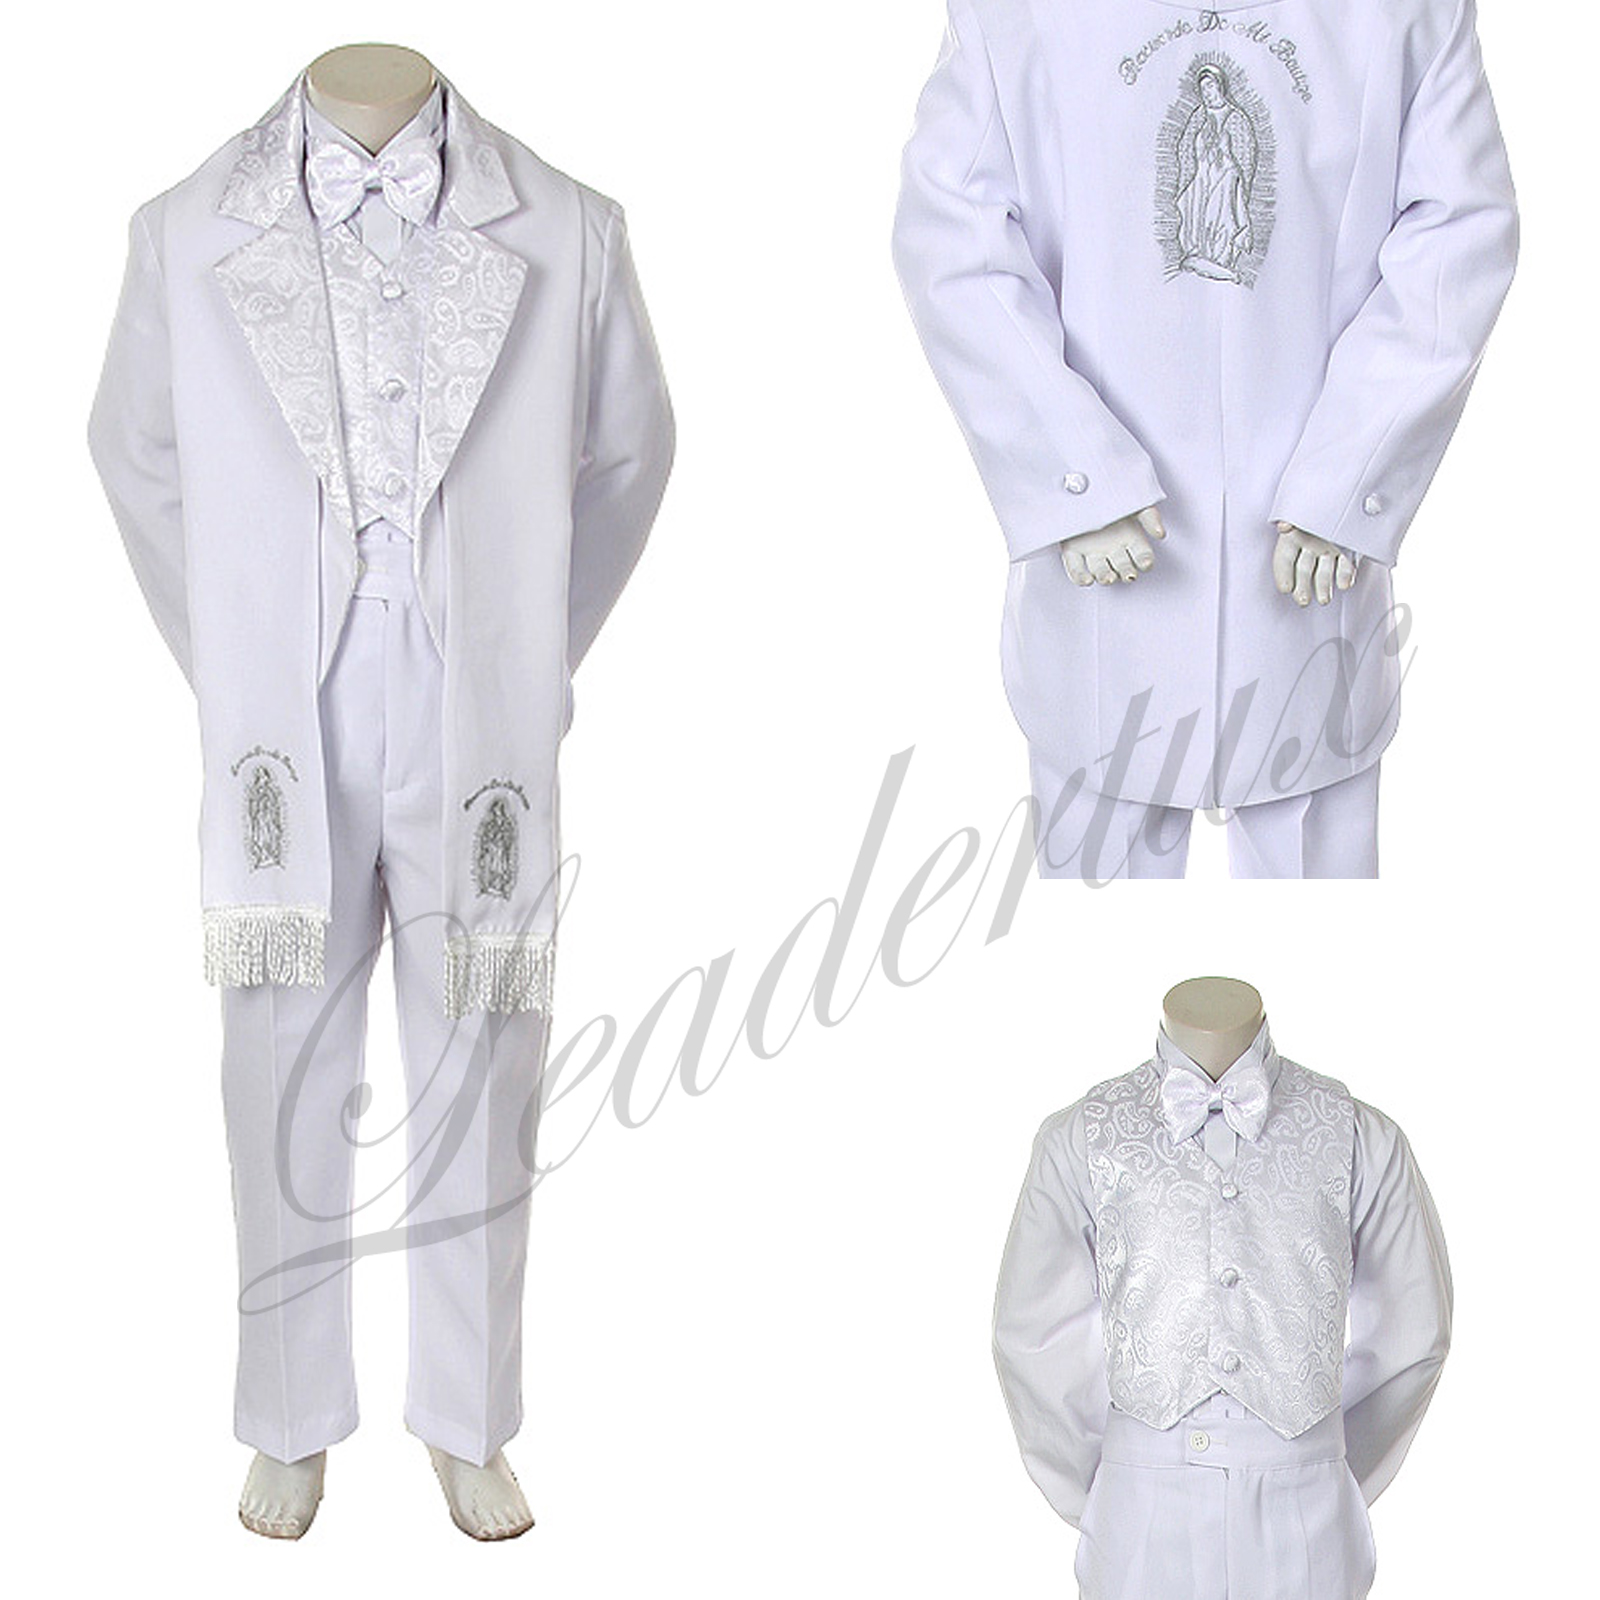 Leadertux 2T 3T 4T Baby Toddler White Formal Christening Baptism Church Boy Suit Tuxedo Outfit 6pc Set + Stole Silver Embroidery